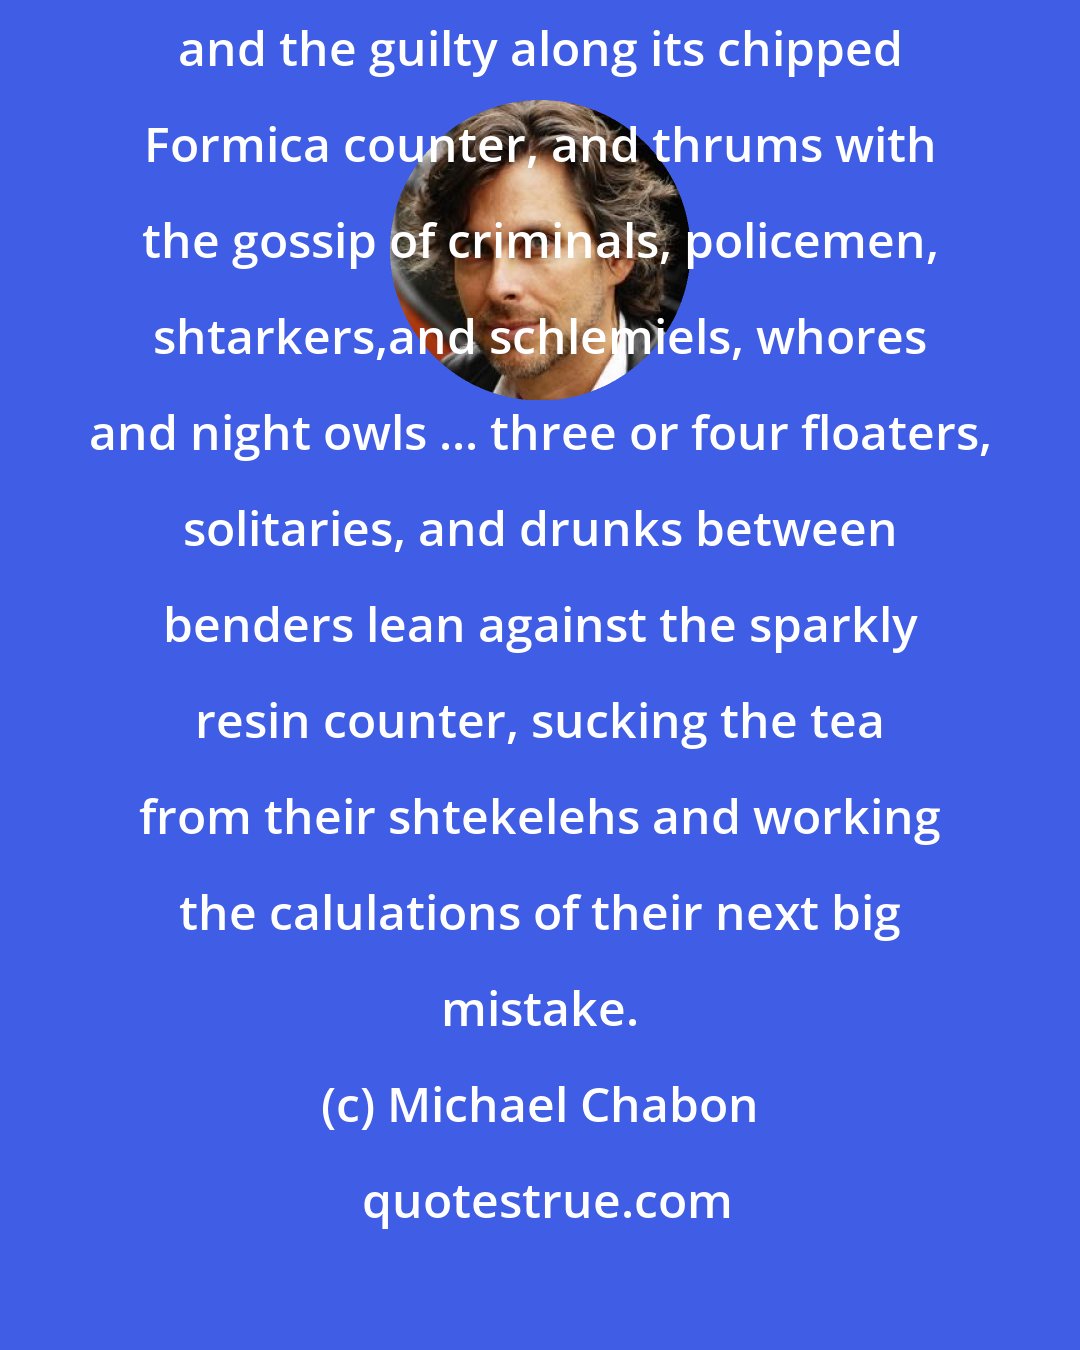 Michael Chabon: It drains the bars and cafes after hours, concentrates the wicked and the guilty along its chipped Formica counter, and thrums with the gossip of criminals, policemen, shtarkers,and schlemiels, whores and night owls ... three or four floaters, solitaries, and drunks between benders lean against the sparkly resin counter, sucking the tea from their shtekelehs and working the calulations of their next big mistake.